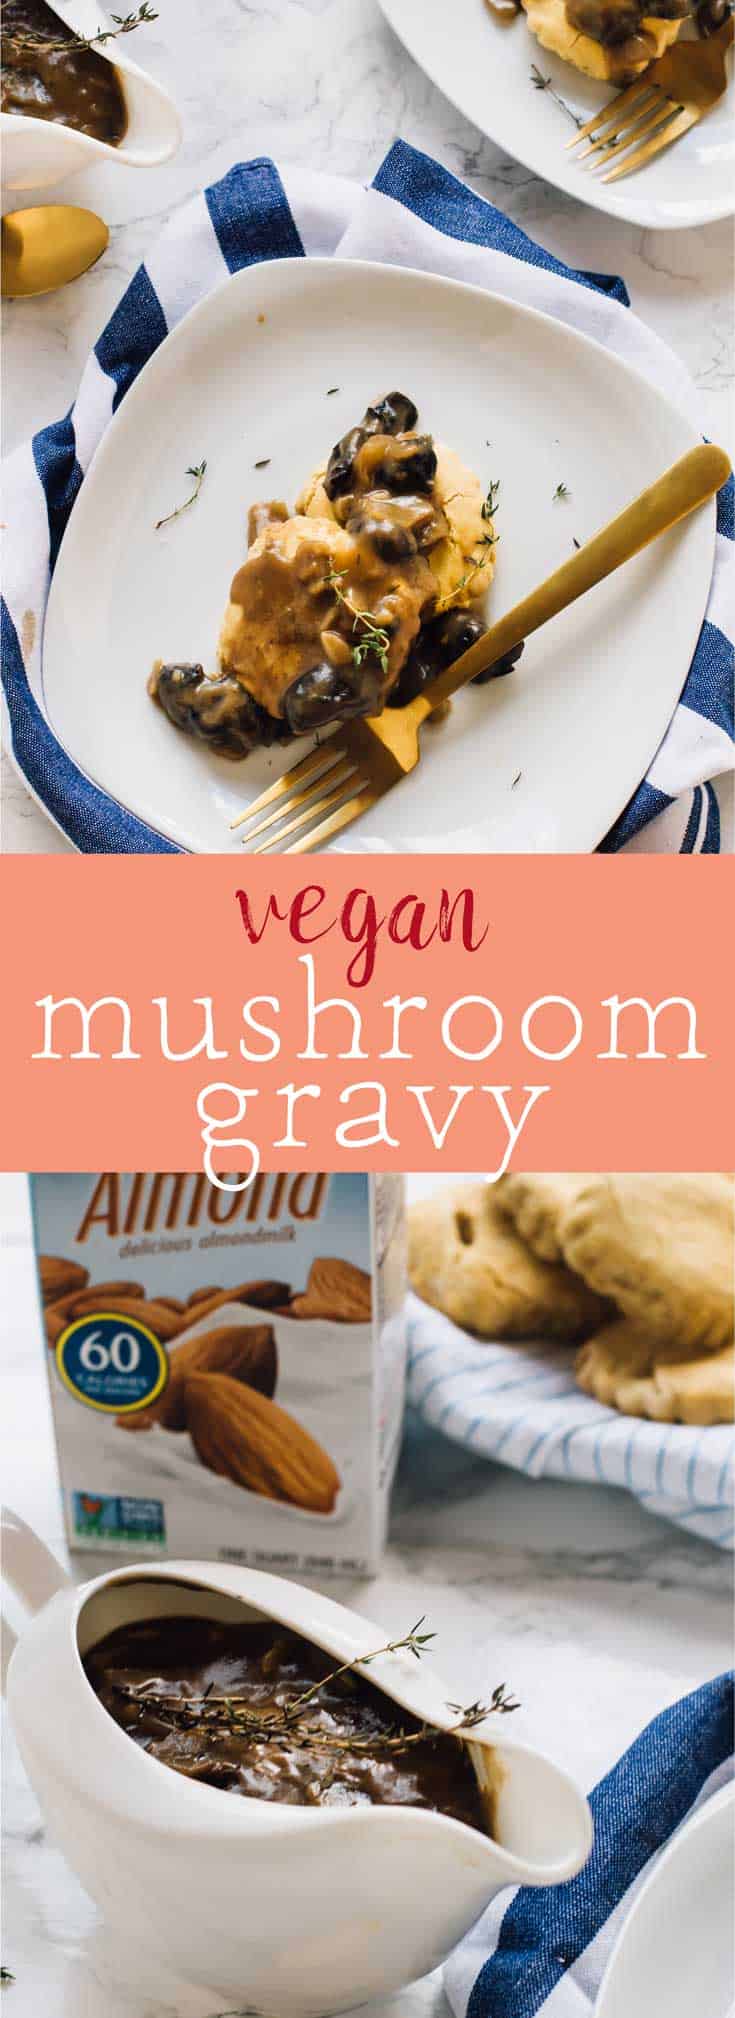 This Vegan Mushroom Gravy is packed with so much creamy flavour! It's the perfect consistency, gluten free and goes perfectly on all your favourite side dishes. via https://jessicainthekitchen.com